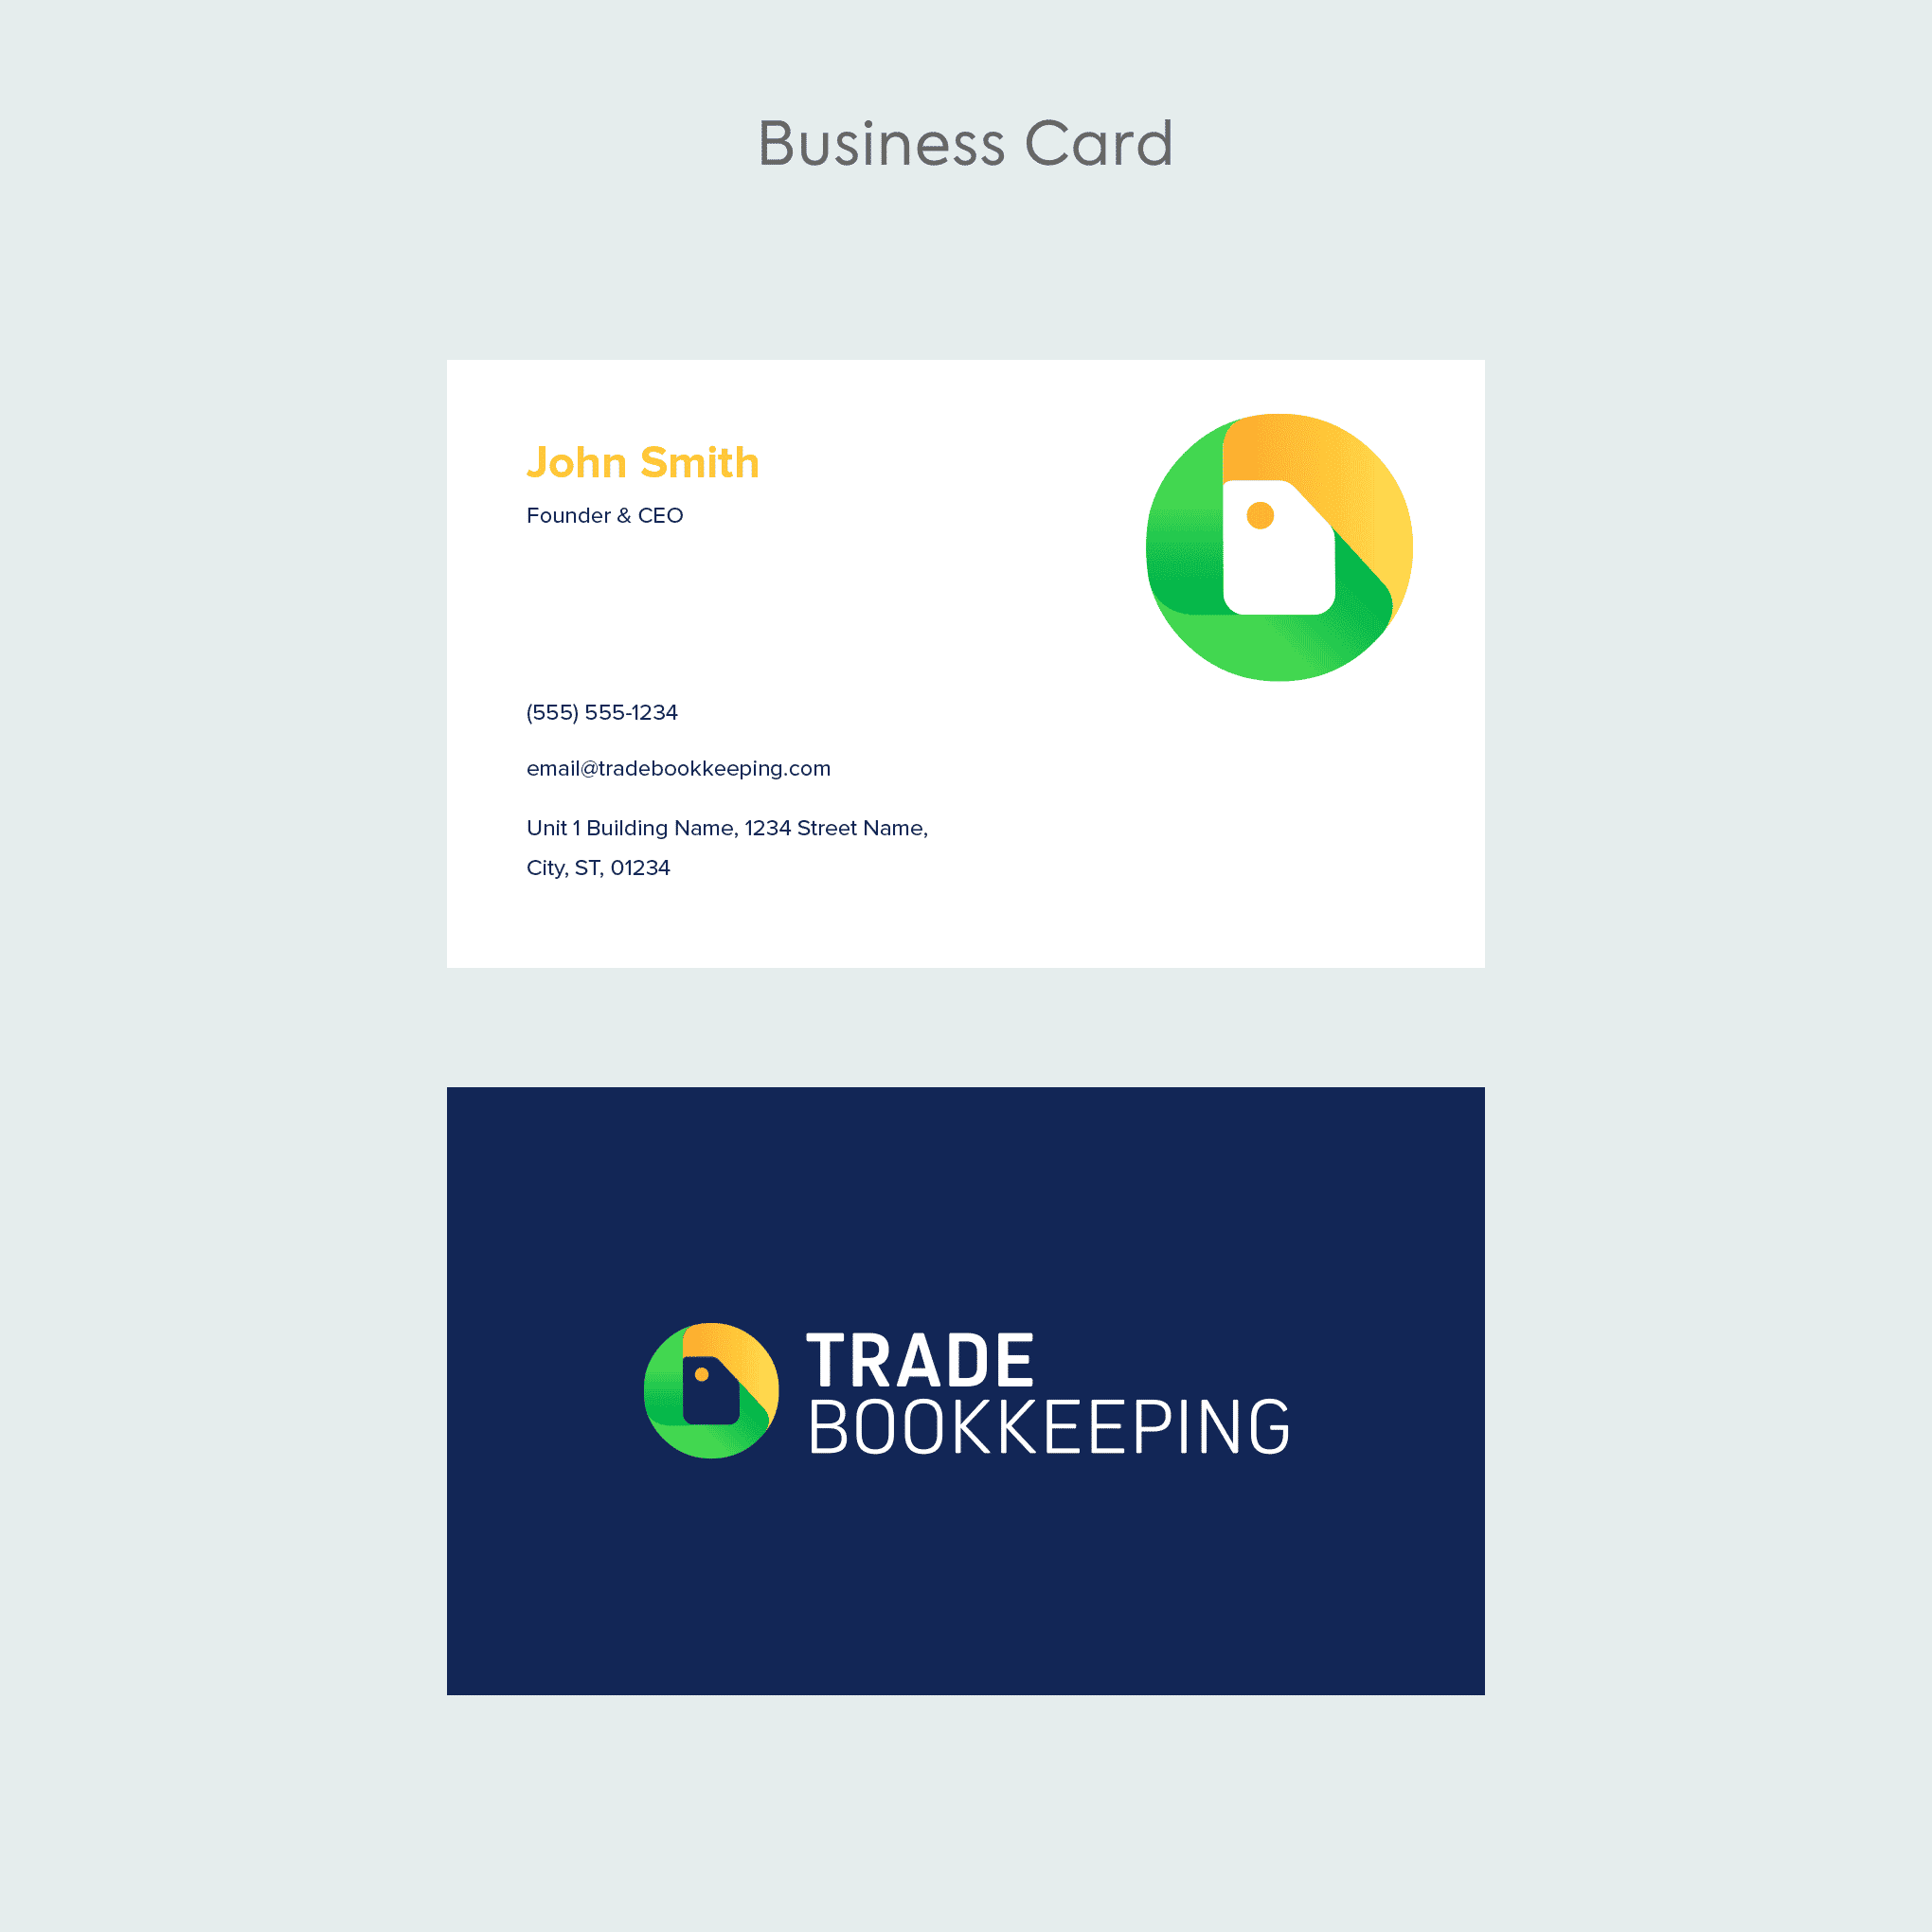 04 - Business Card Template (11)